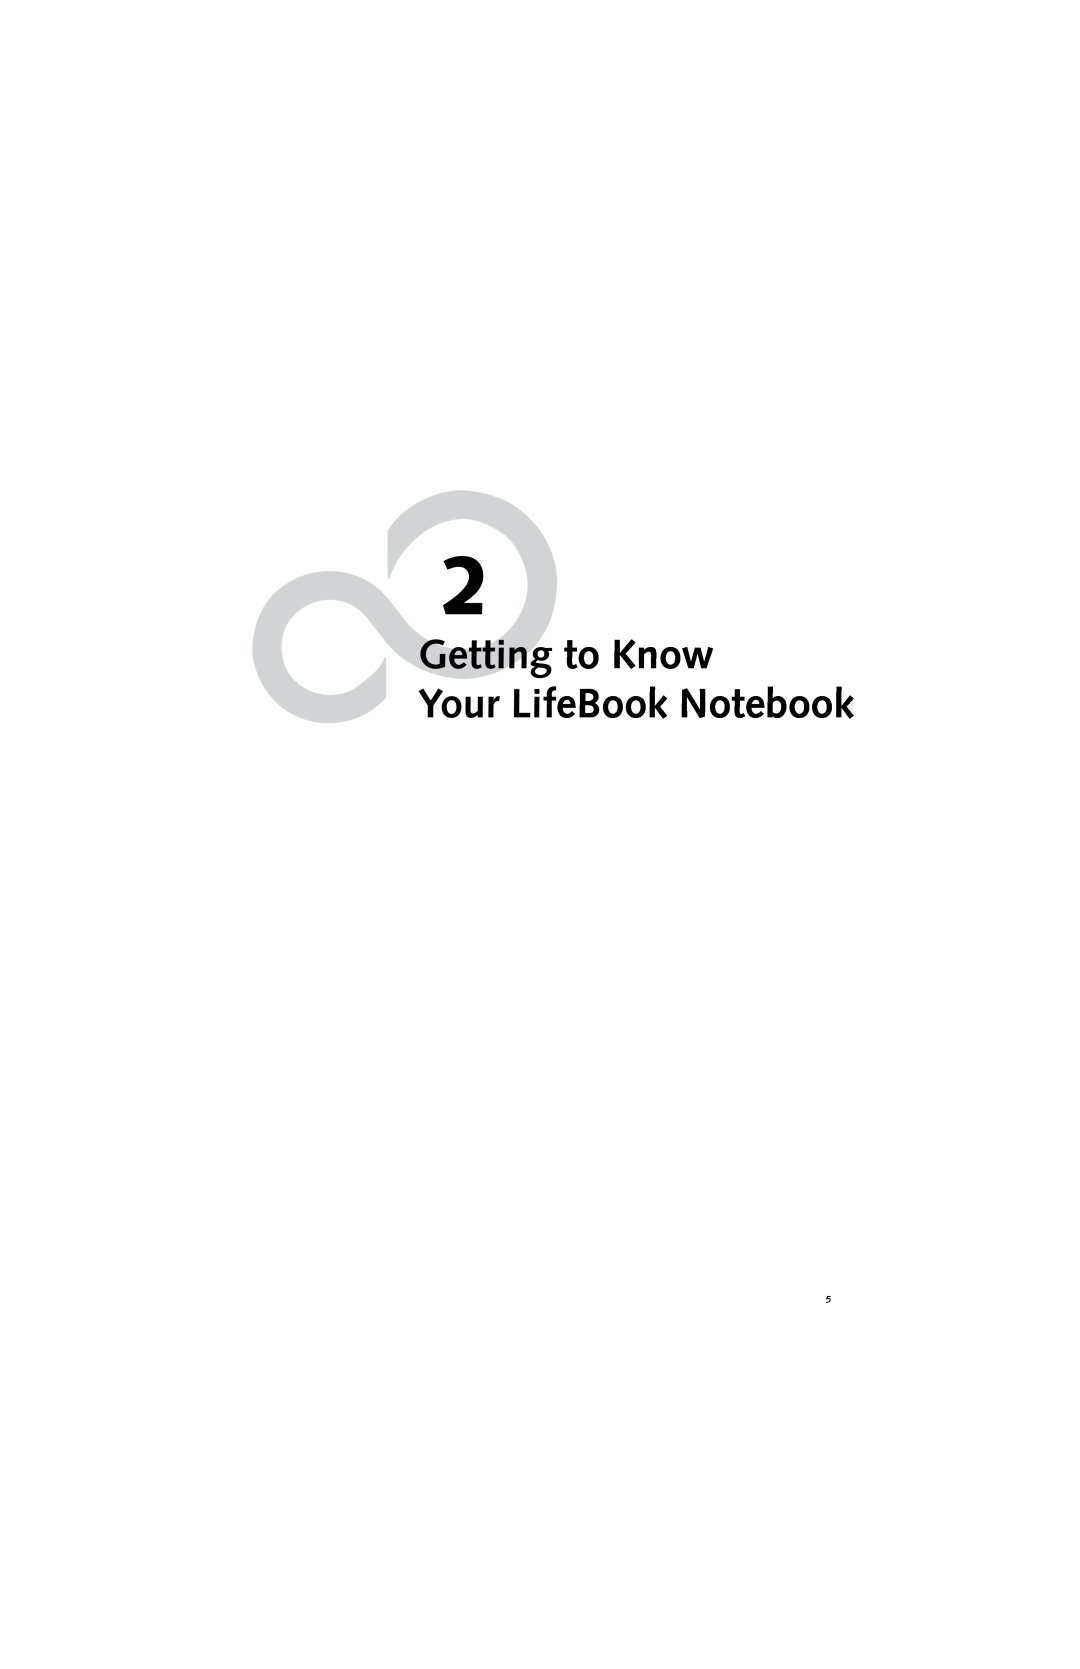 Fujitsu N6420 manual Getting to Know Your LifeBook Notebook 